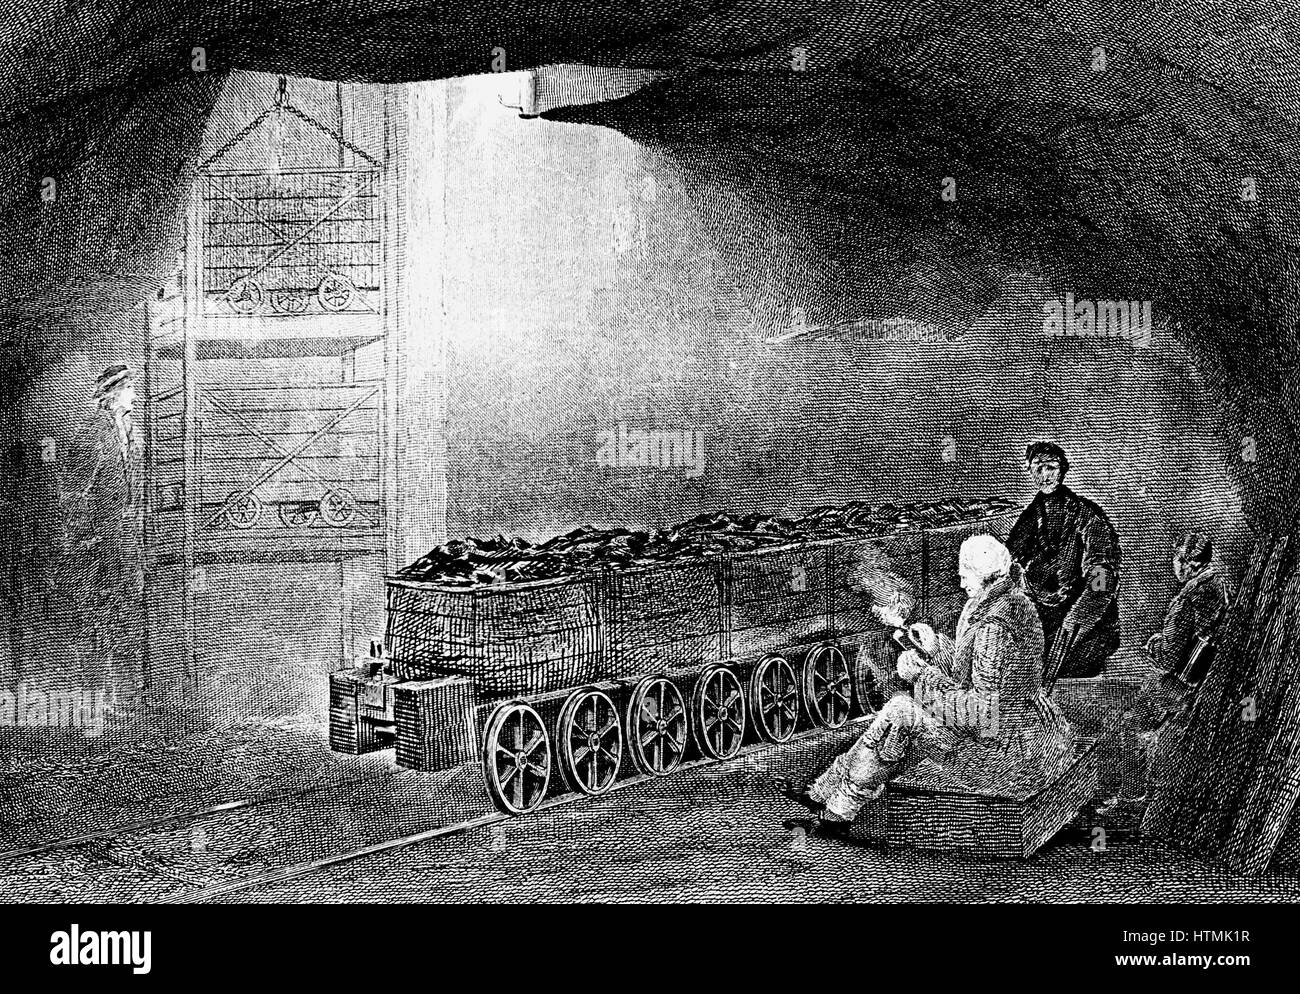 Coal Mining : Bottom of pit shaft with train of wagons waiting to be hoisted to surface. Flanged wheels on coal wagon. From W Fordyce 'A History of Coal, Coke, Coal Fields….' London, 1860. Engraving Stock Photo